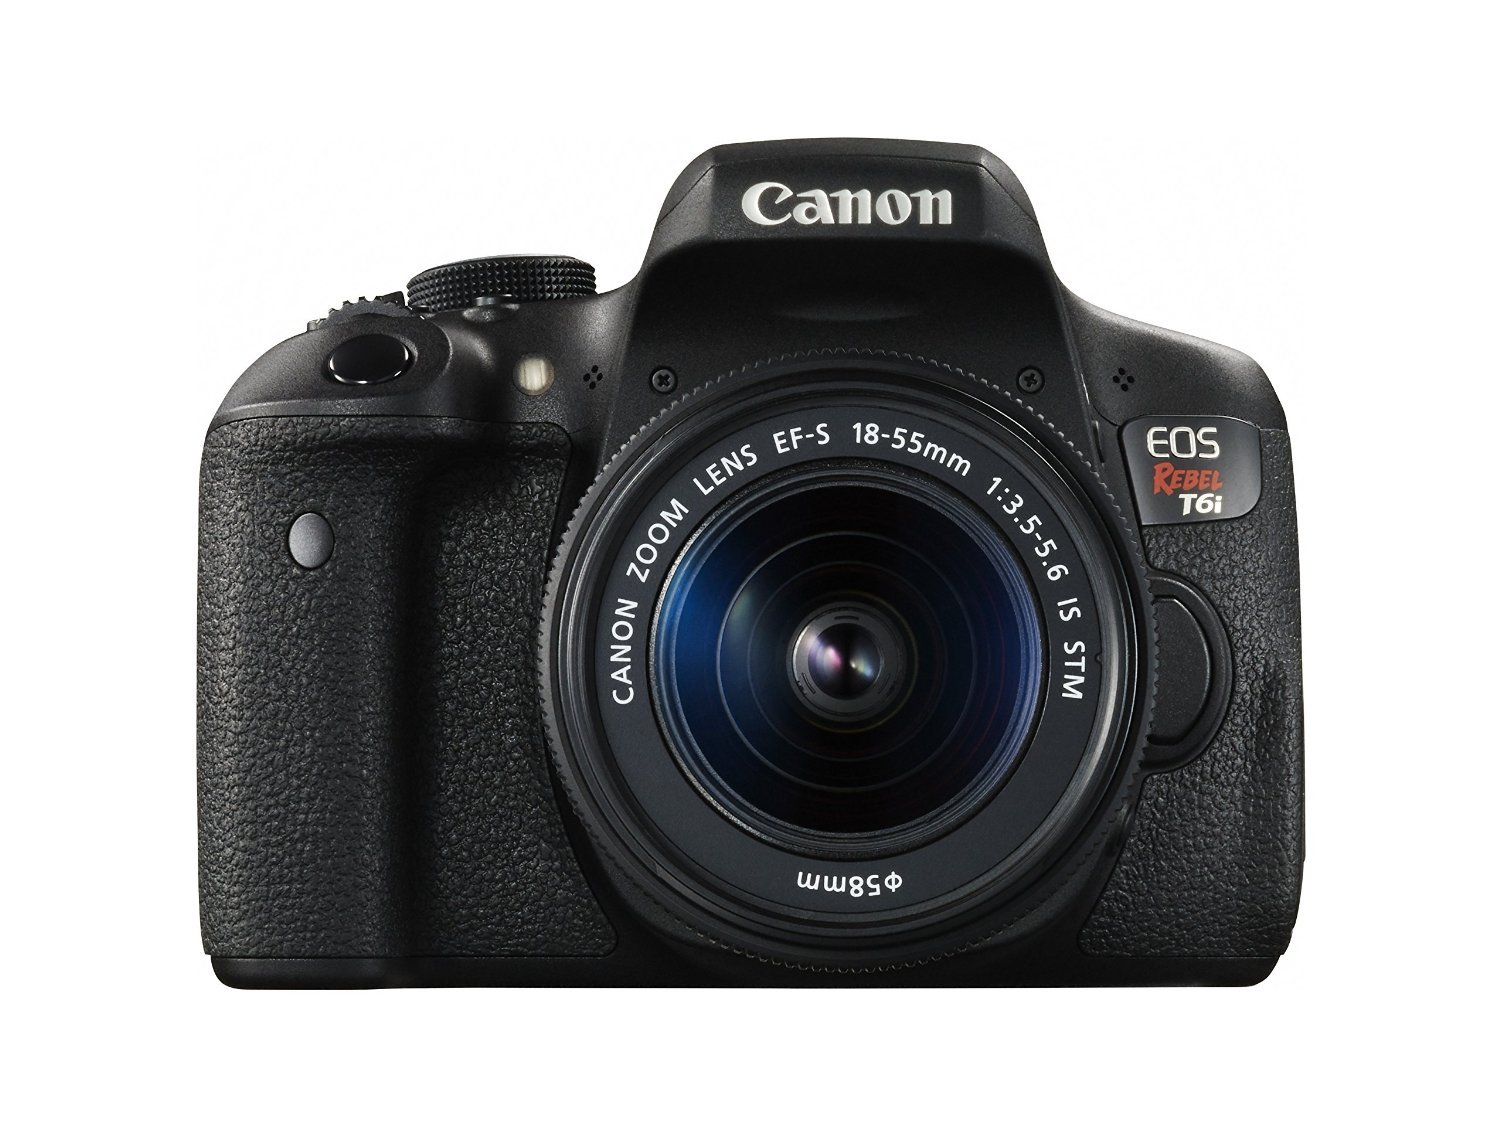 Canon EOS Rebel T6i Digital SLR with EF-S 18-55mm IS STM Lens - Wi-Fi and NFC Enabled (Certified Refurbished)